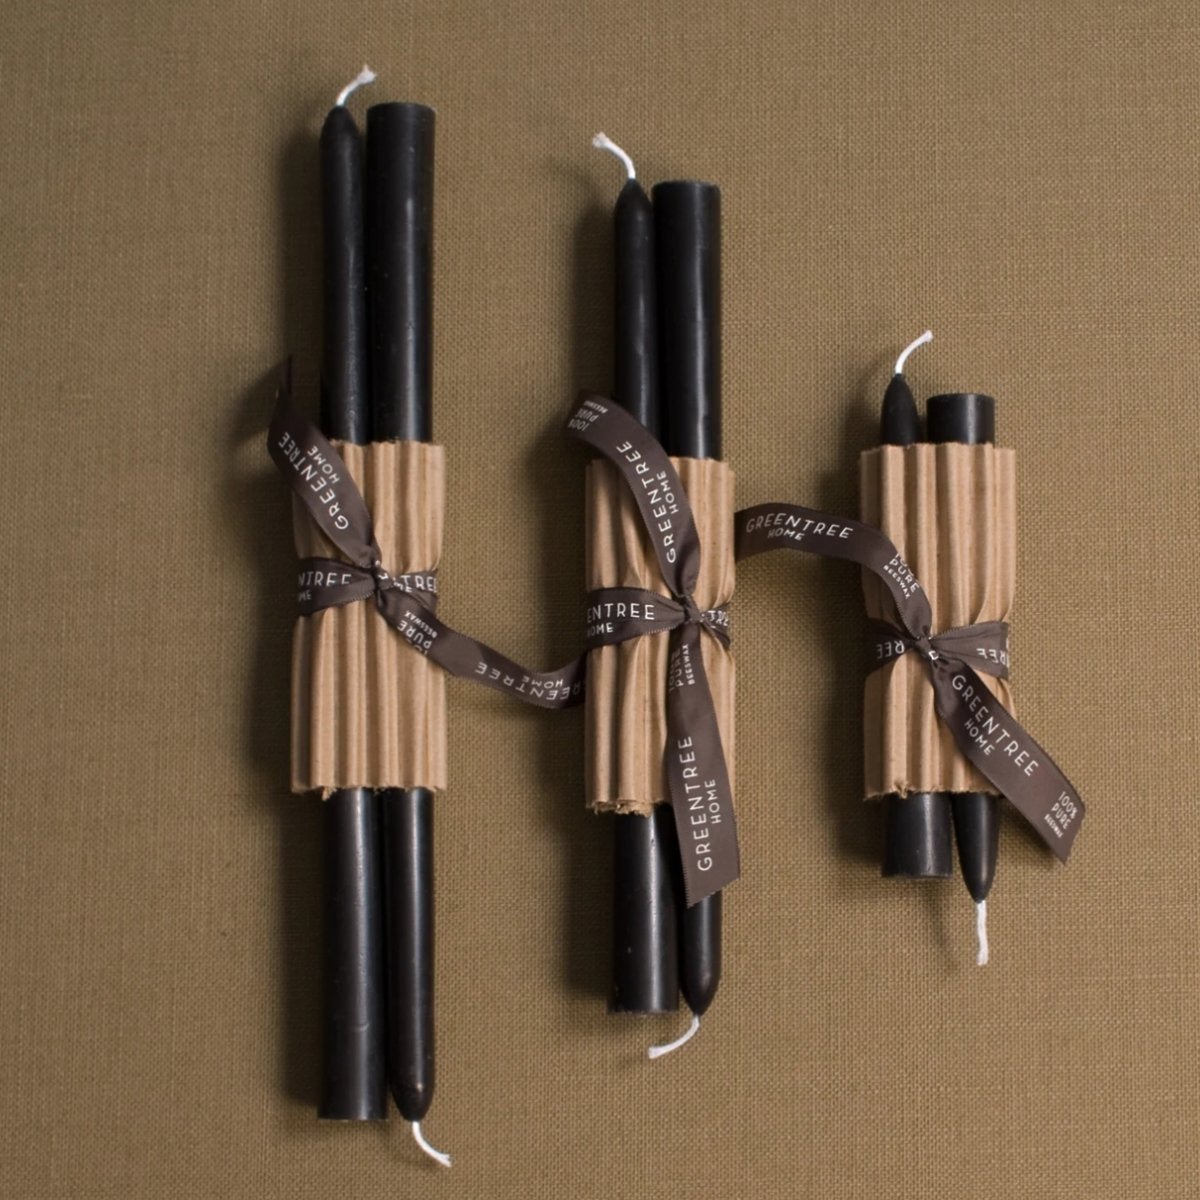 Pair of Everyday Beeswax Taper Candles - Homebody Denver